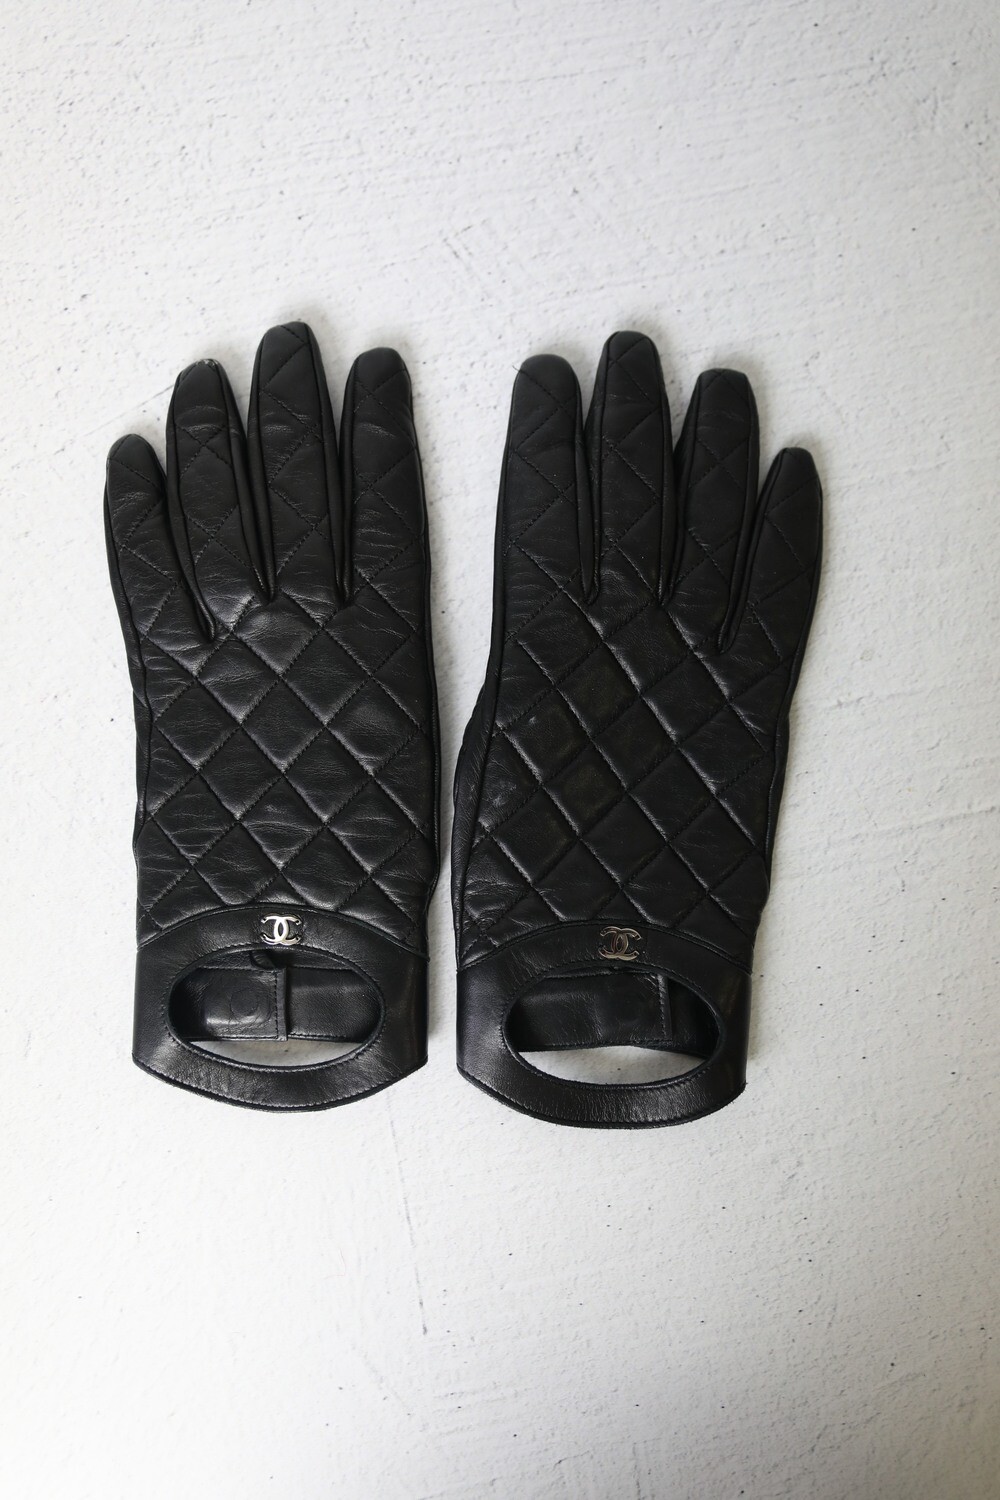 Chanel Quilted Leather Gloves, Black Lambskin, Preowned WA001